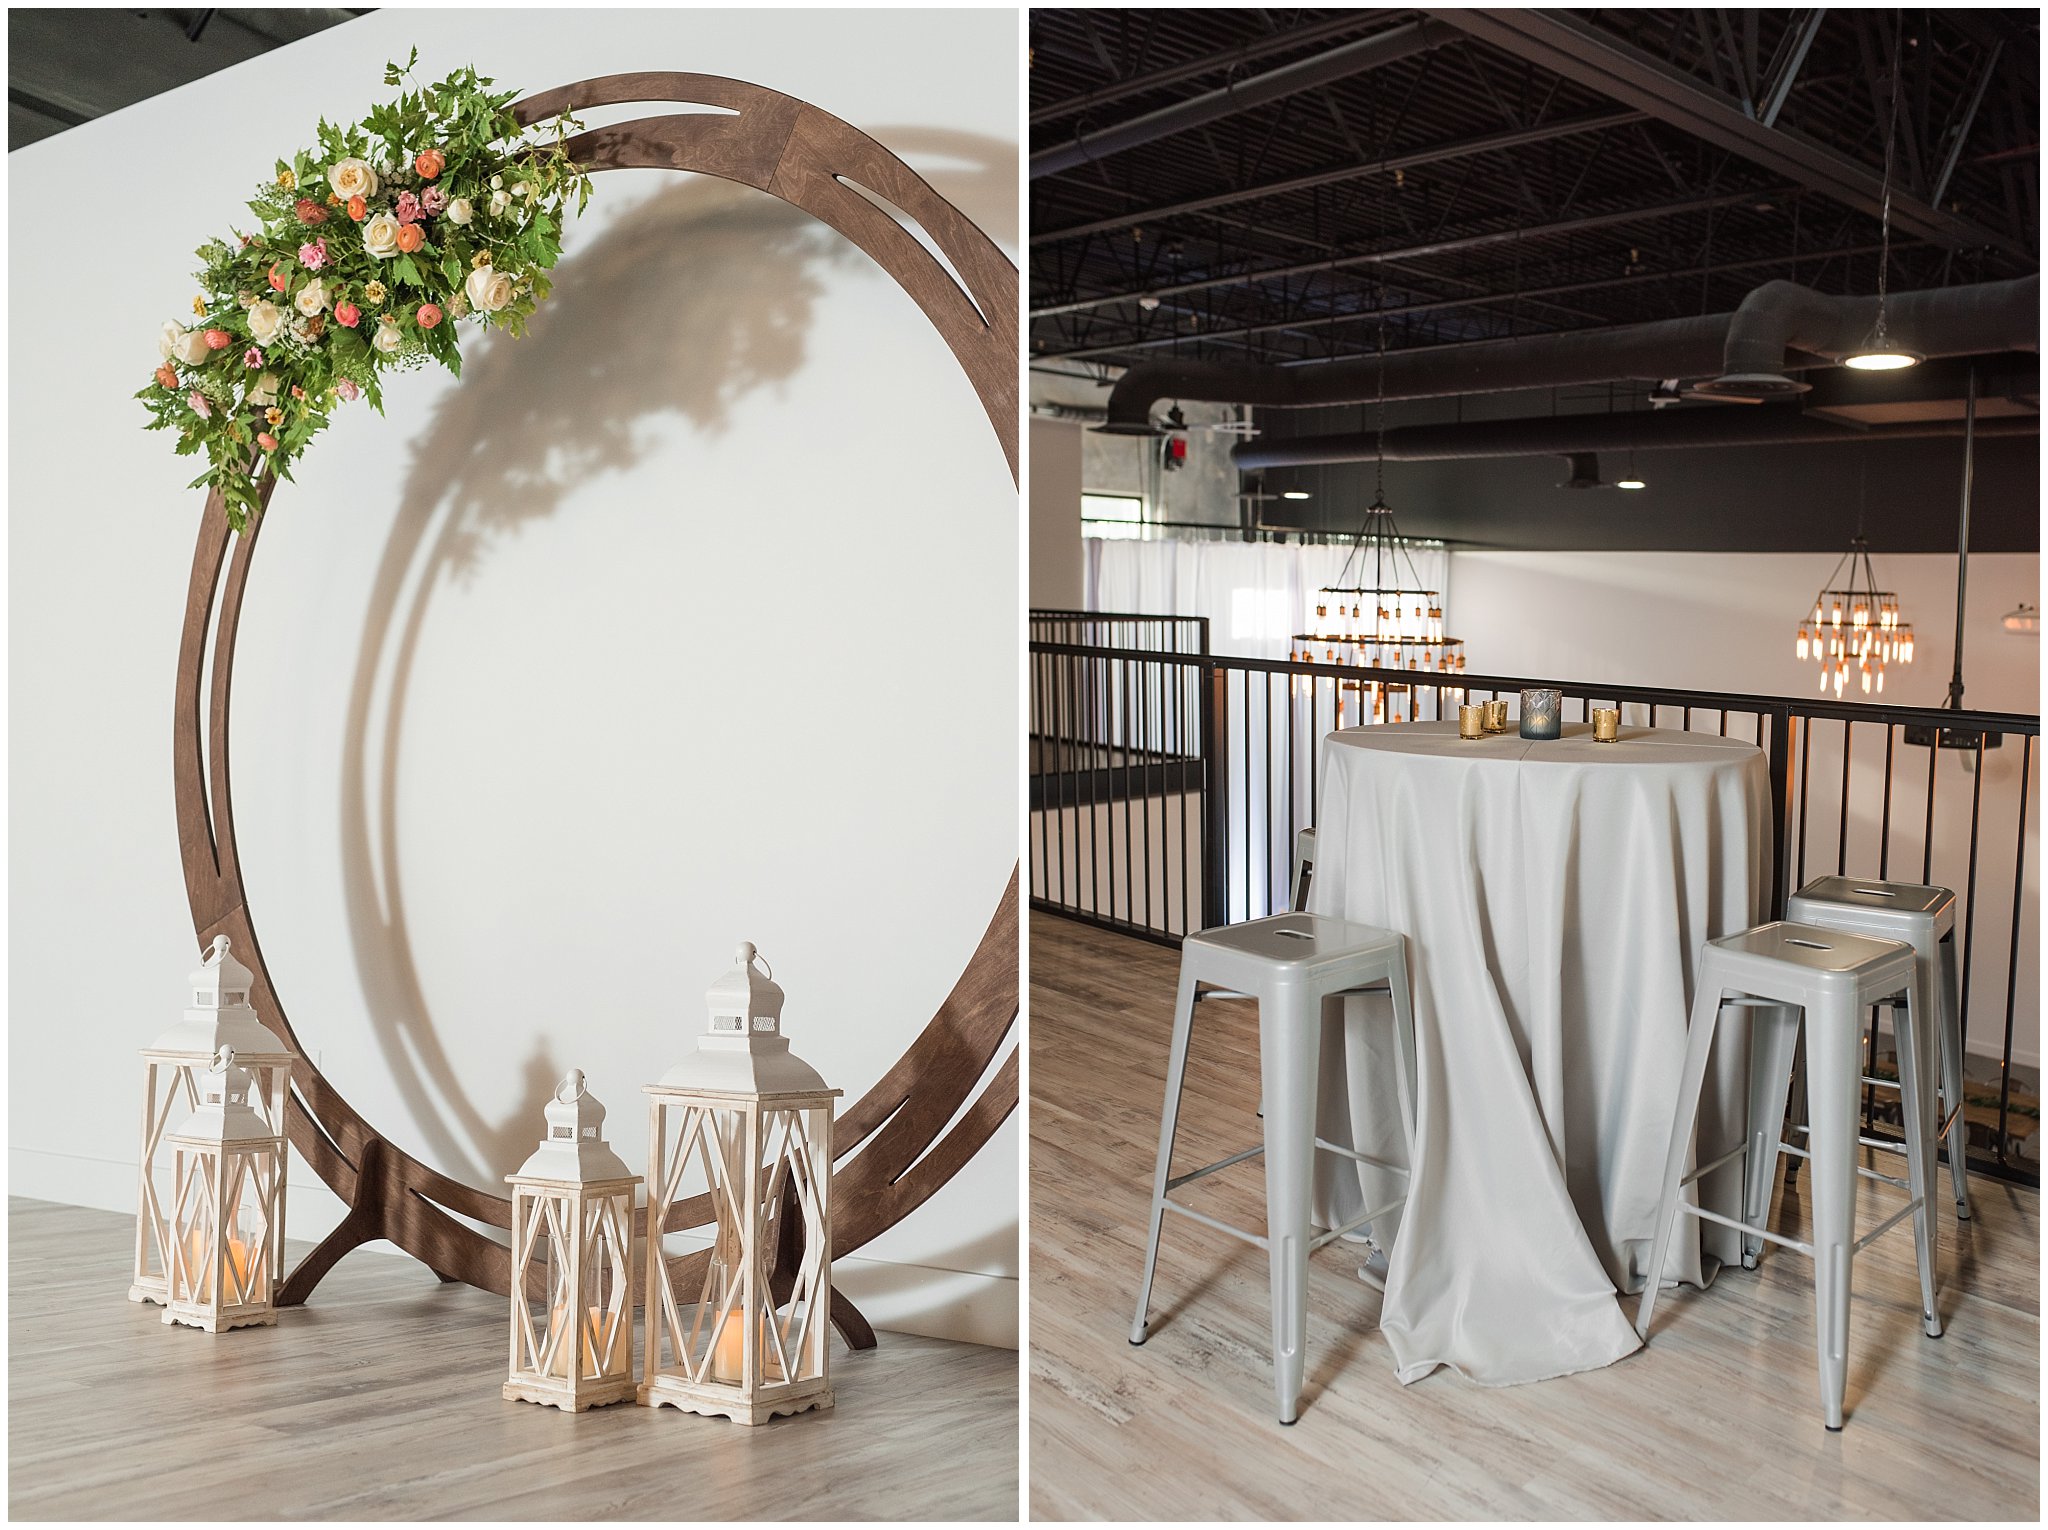 Wooden round floral ceremony arch on industrial brick wall | The Foundry | Utah Wedding Venue | Shout-out Saturday | Jessie and Dallin Photography